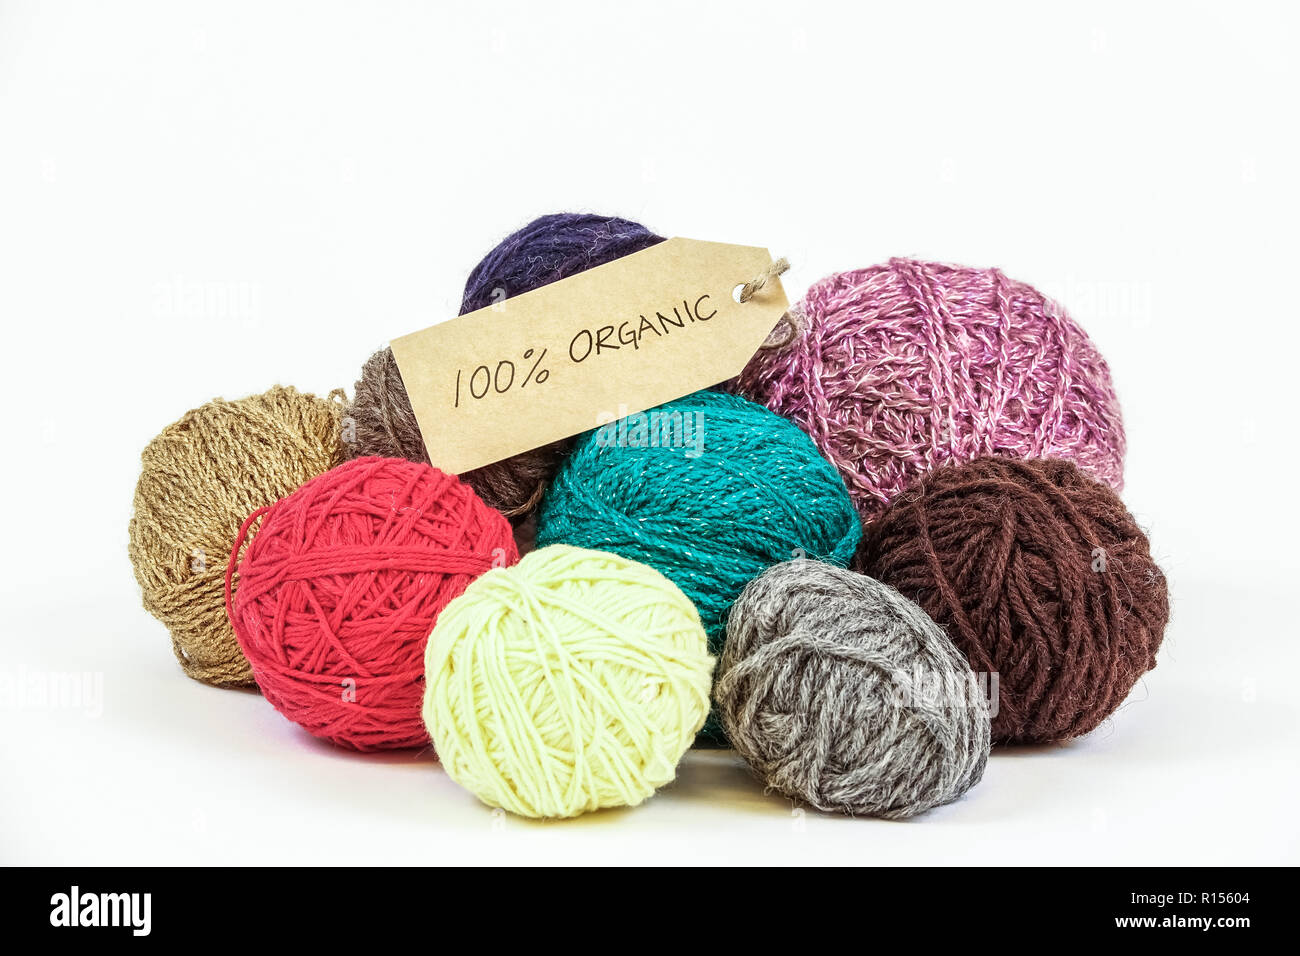 Organic wool. Colorful balls of yarn. Knitting threads. Eco textile tag. White background. Stock Photo